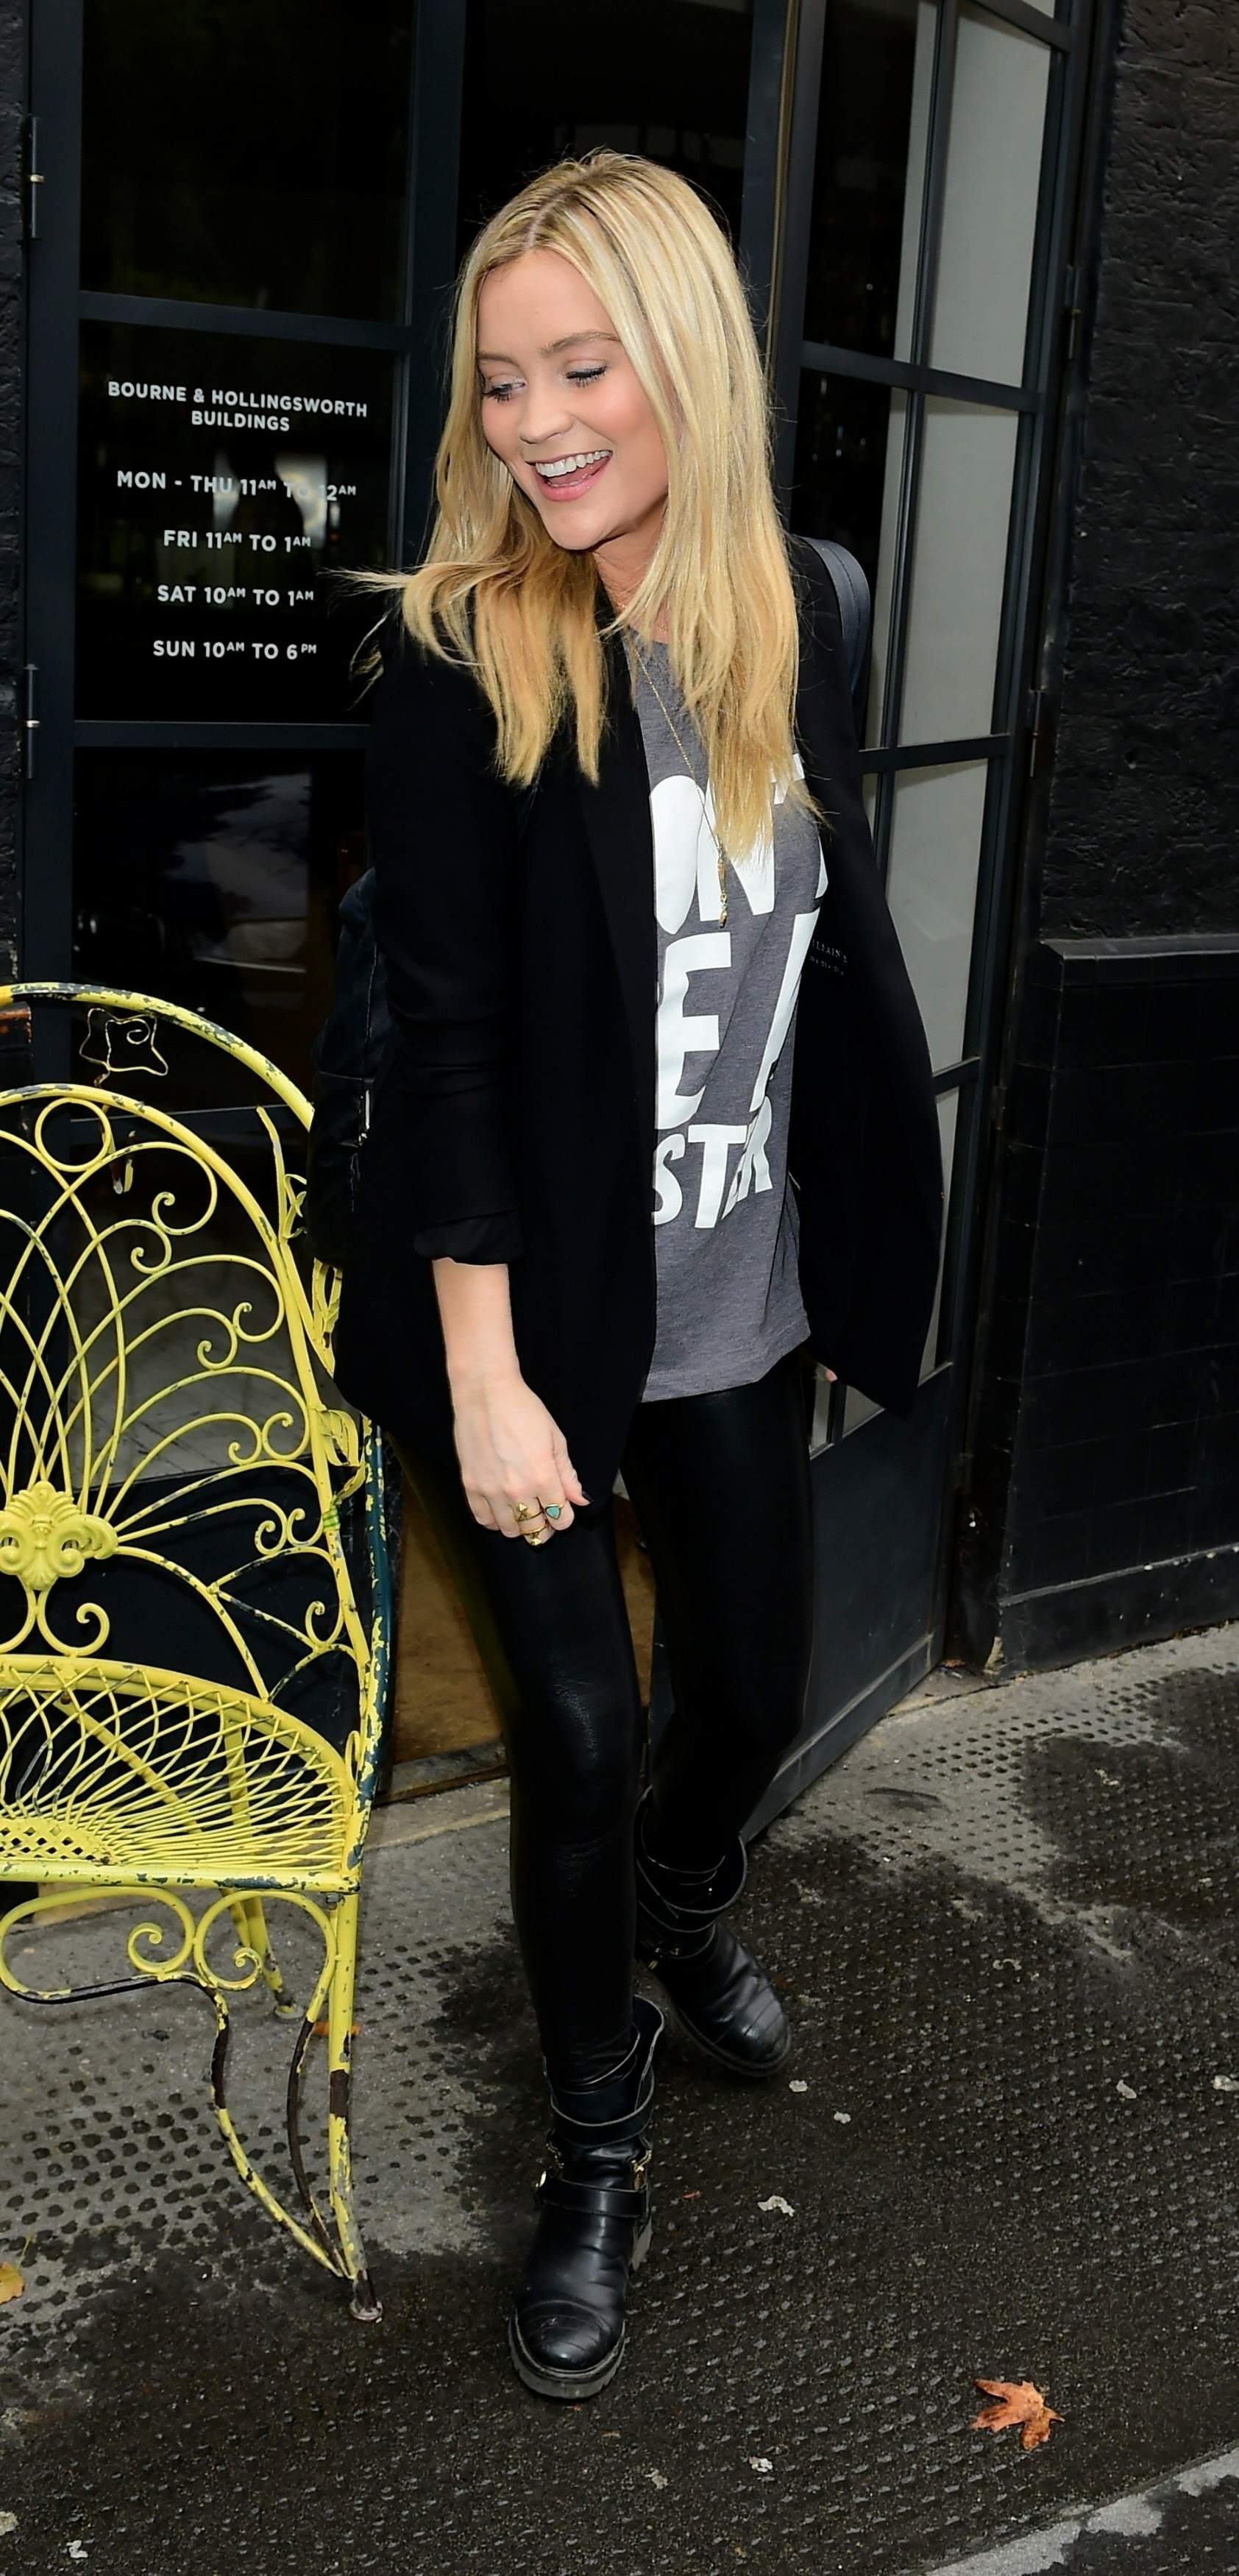 Laura Whitmore arrives at Bourne and Hollingsworth Buildings